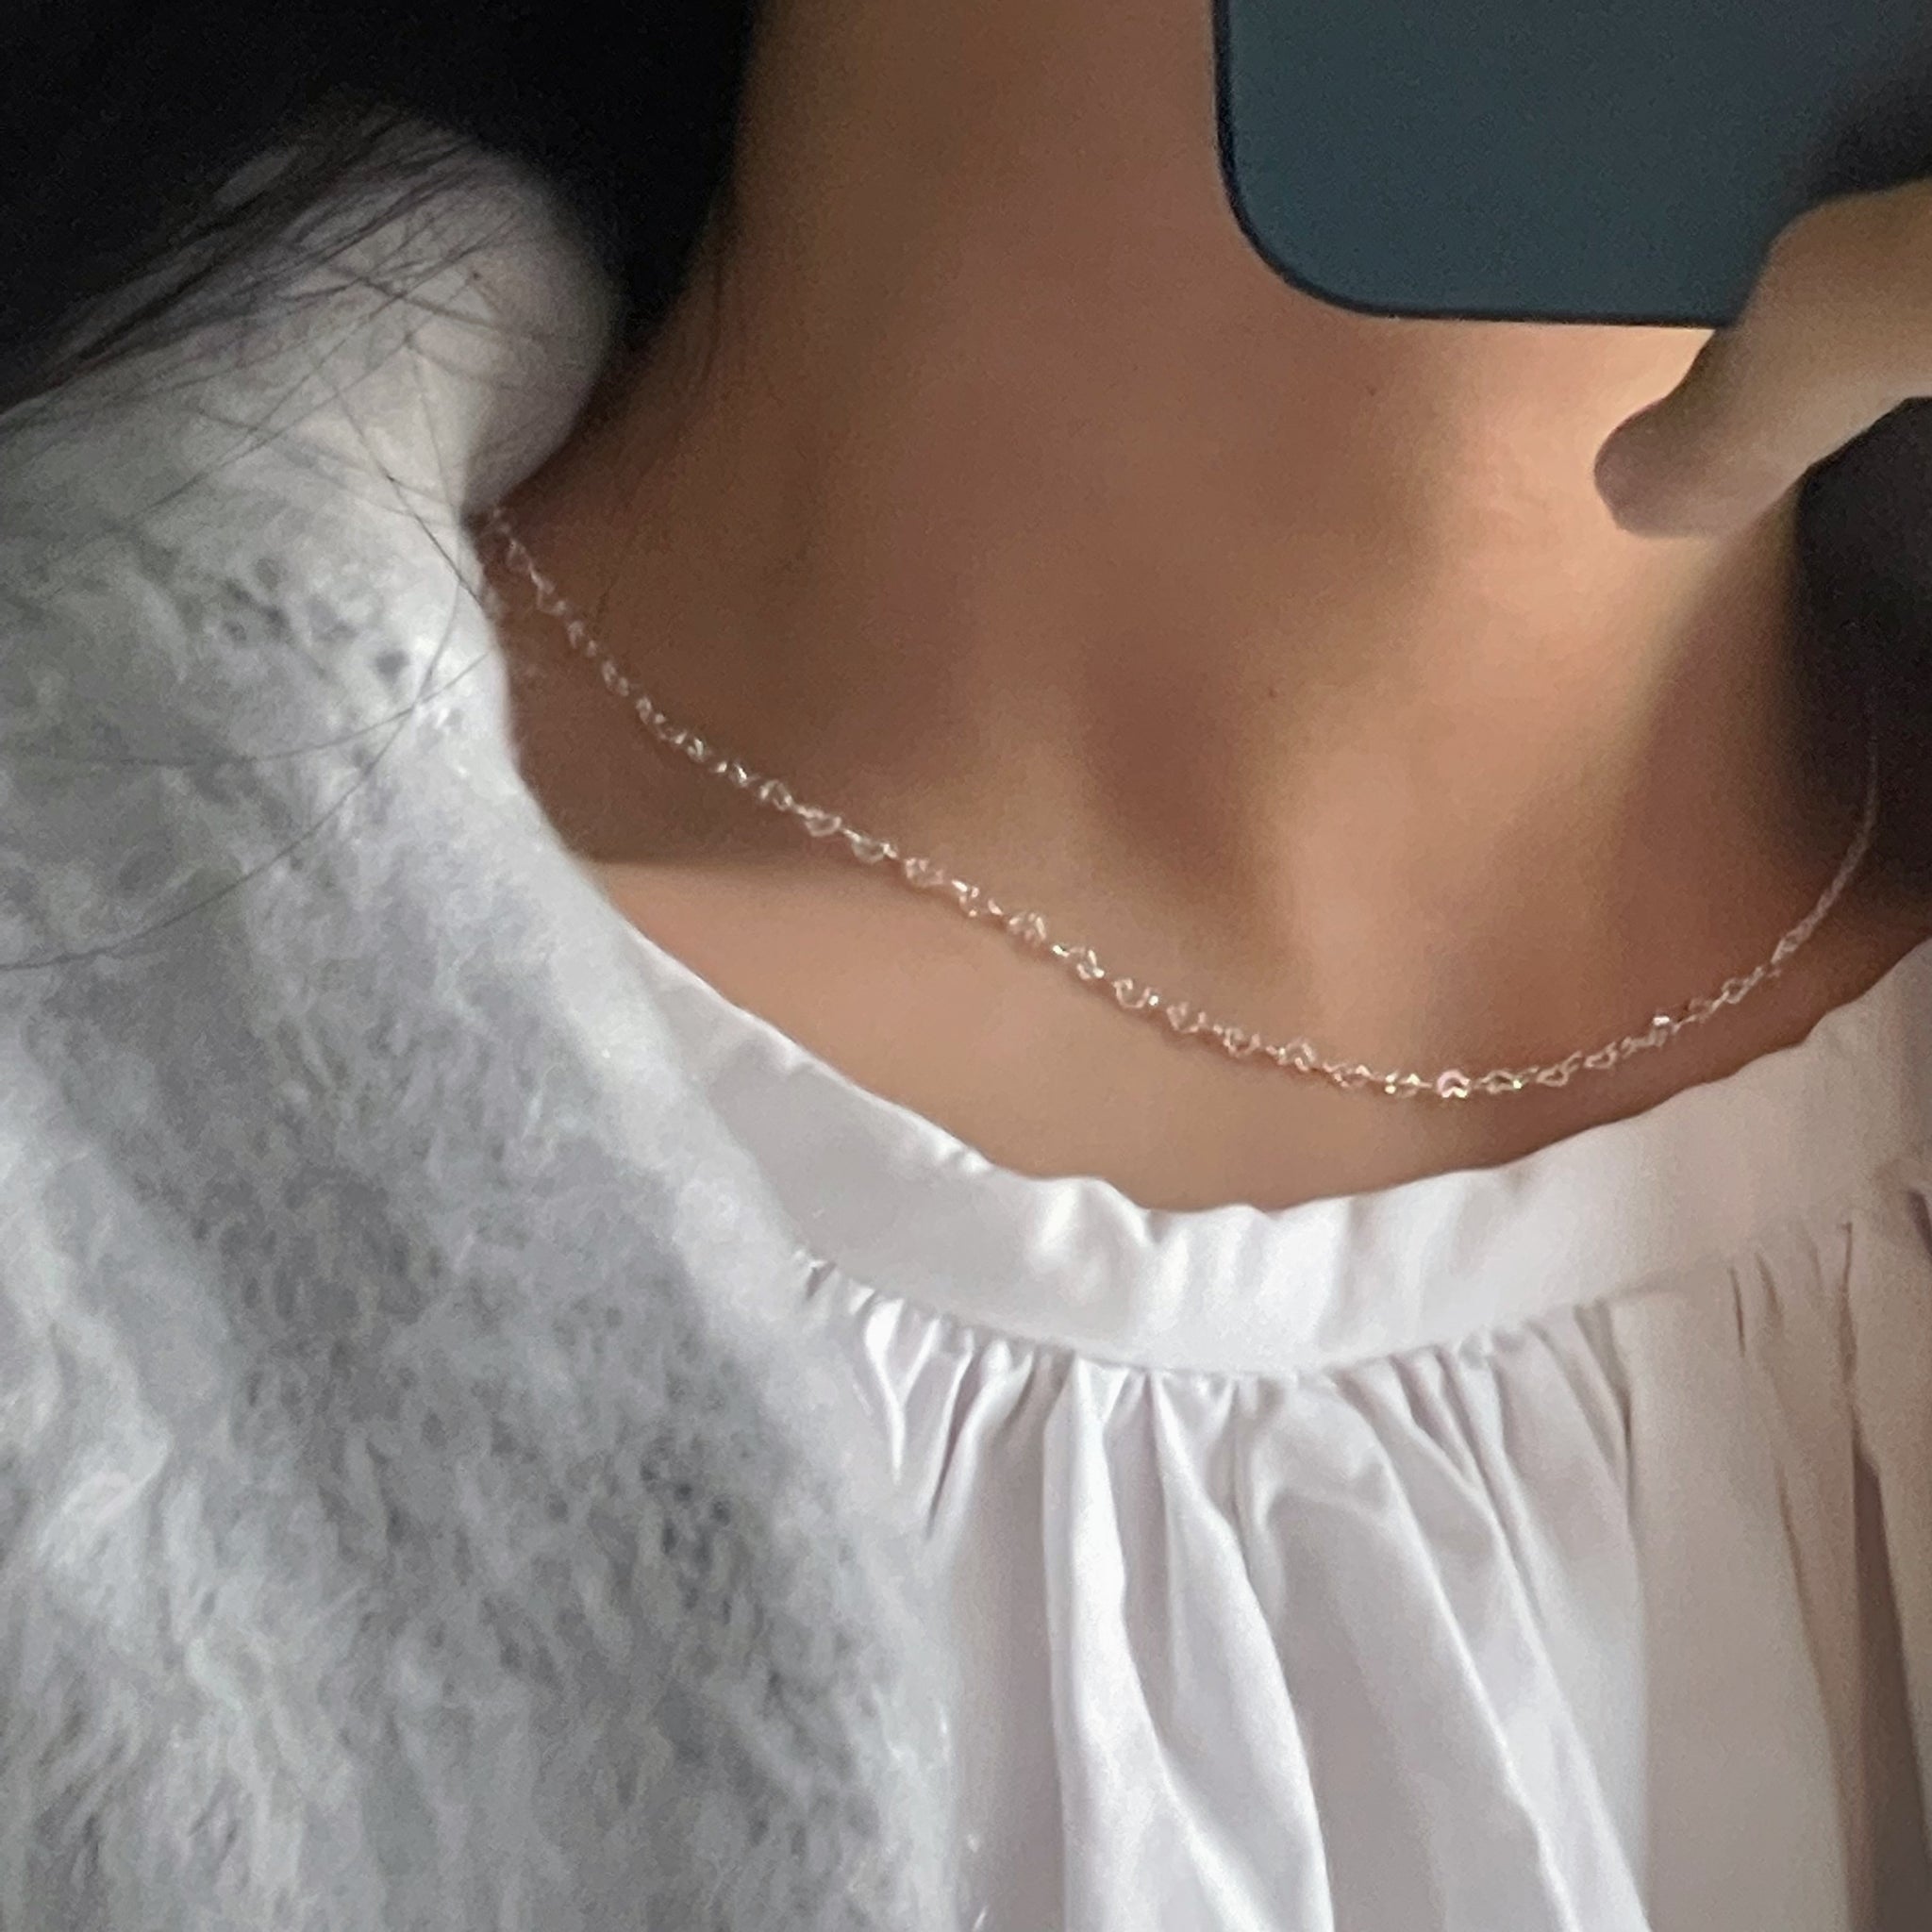 925Silver Heart Chain Necklace